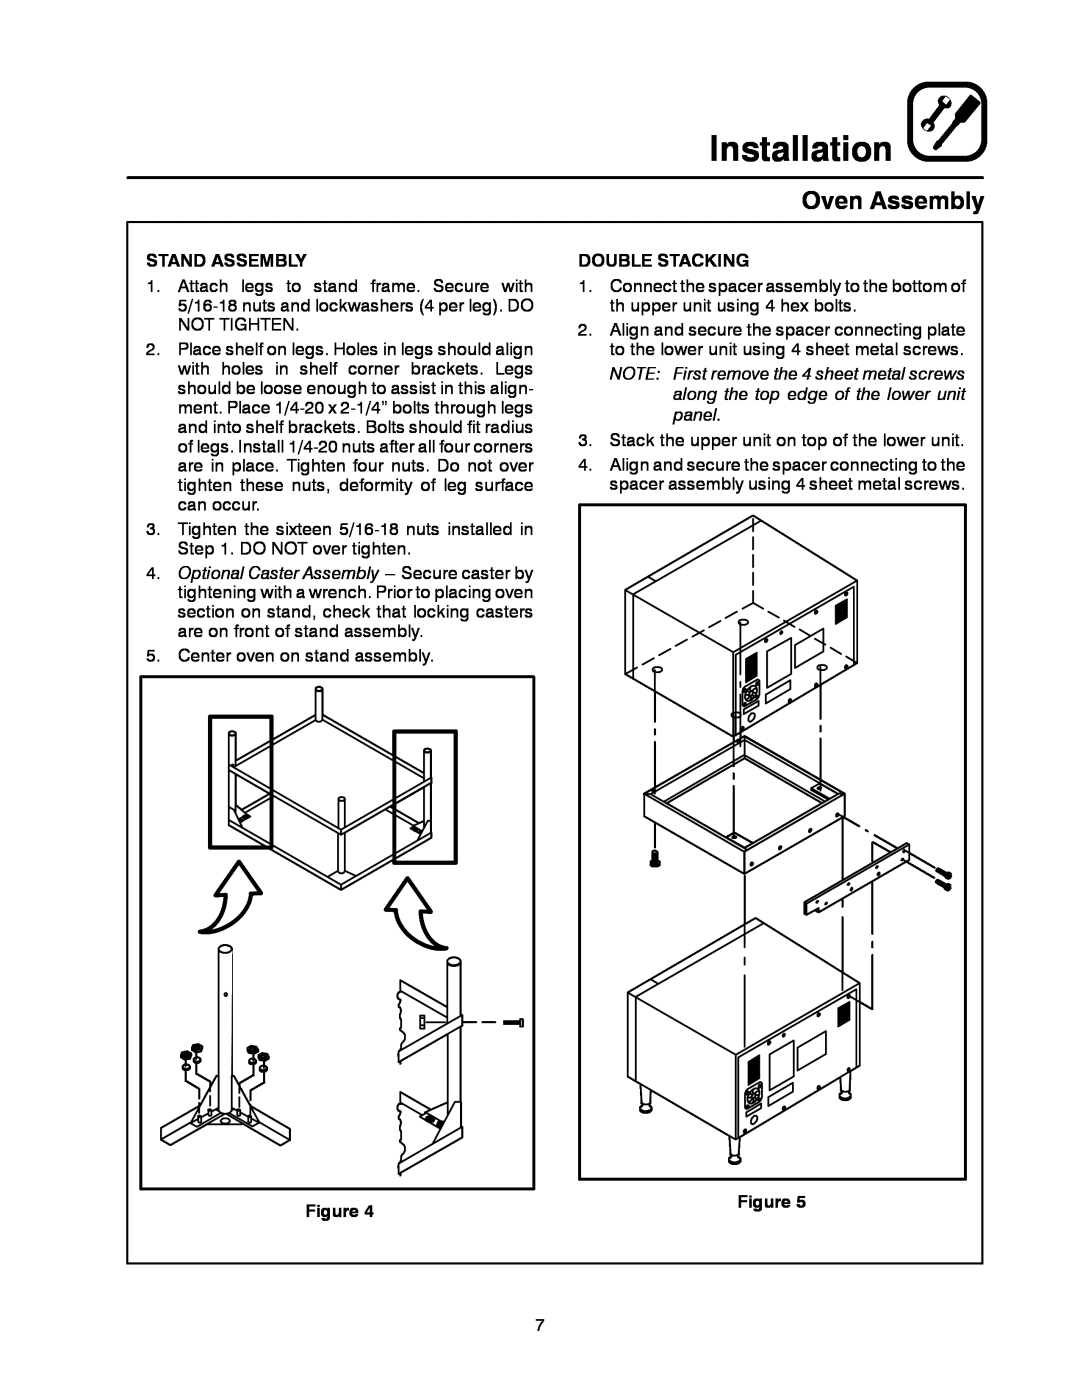 Blodgett 1400 SERIES manual Installation, Stand Assembly, Double Stacking, Figure 